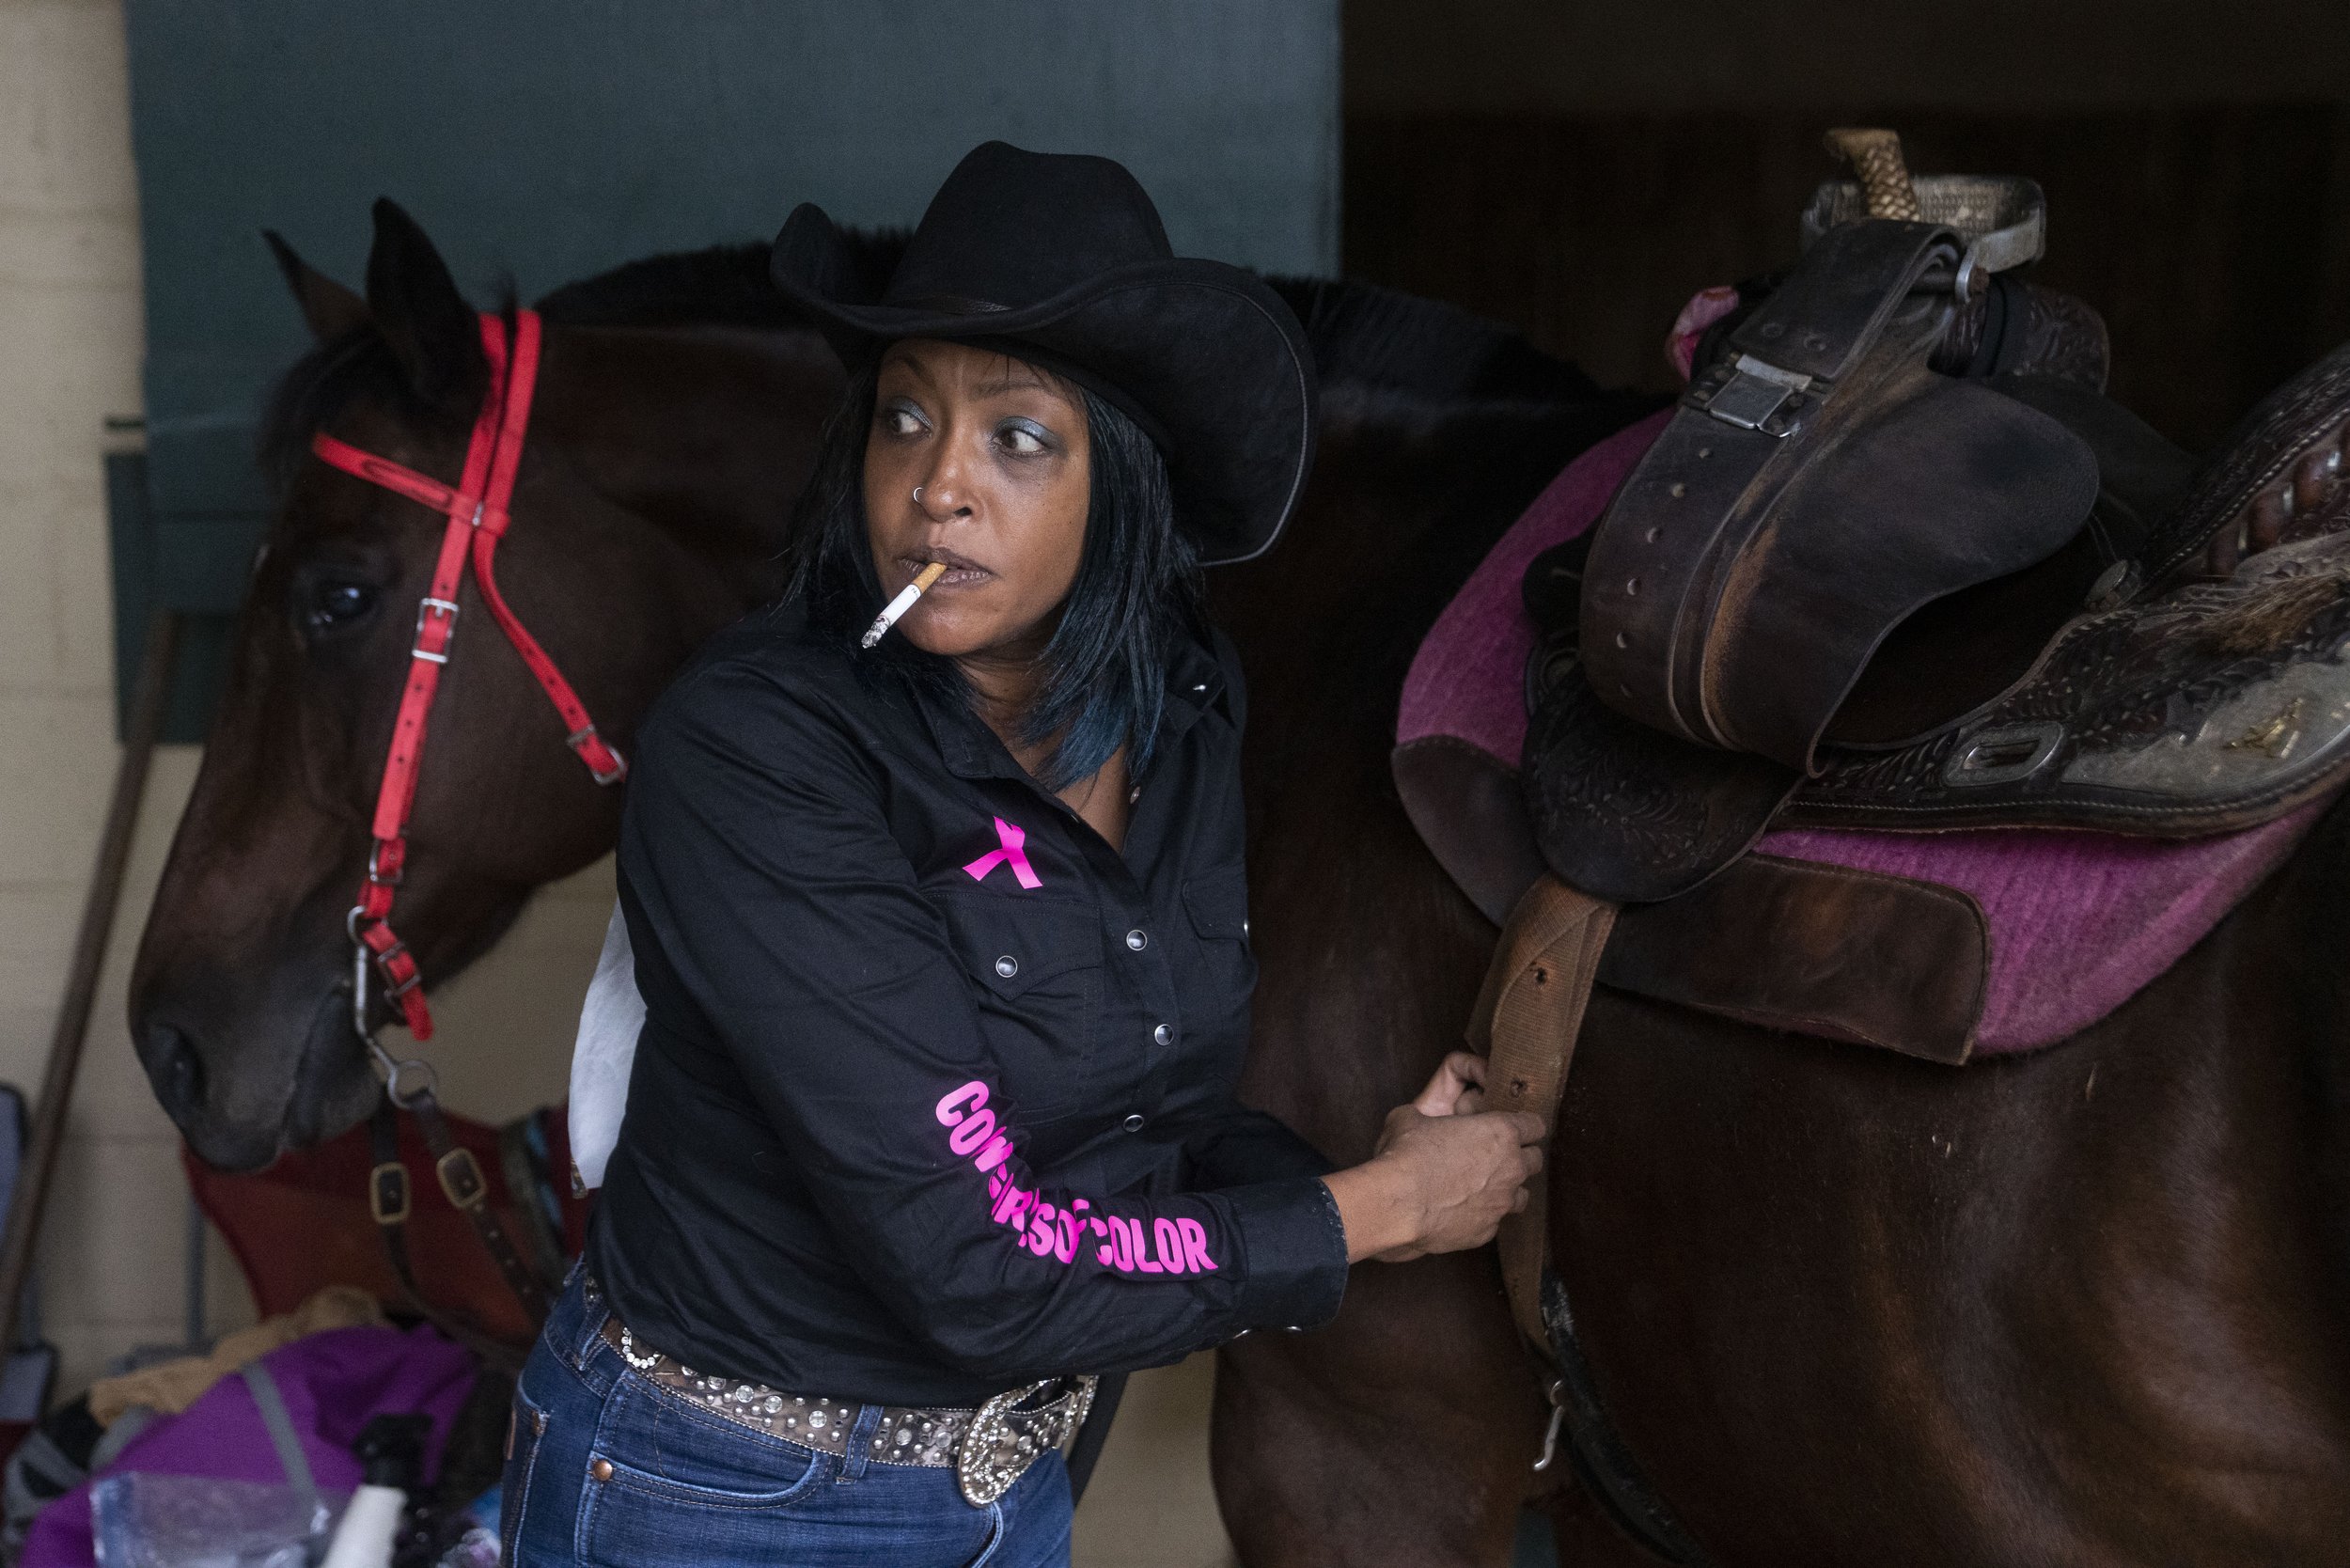  Leslie DeLacy prepares her horse before competing in the Bill Pickett Invitational Rodeo, at the Show Place Arena. 